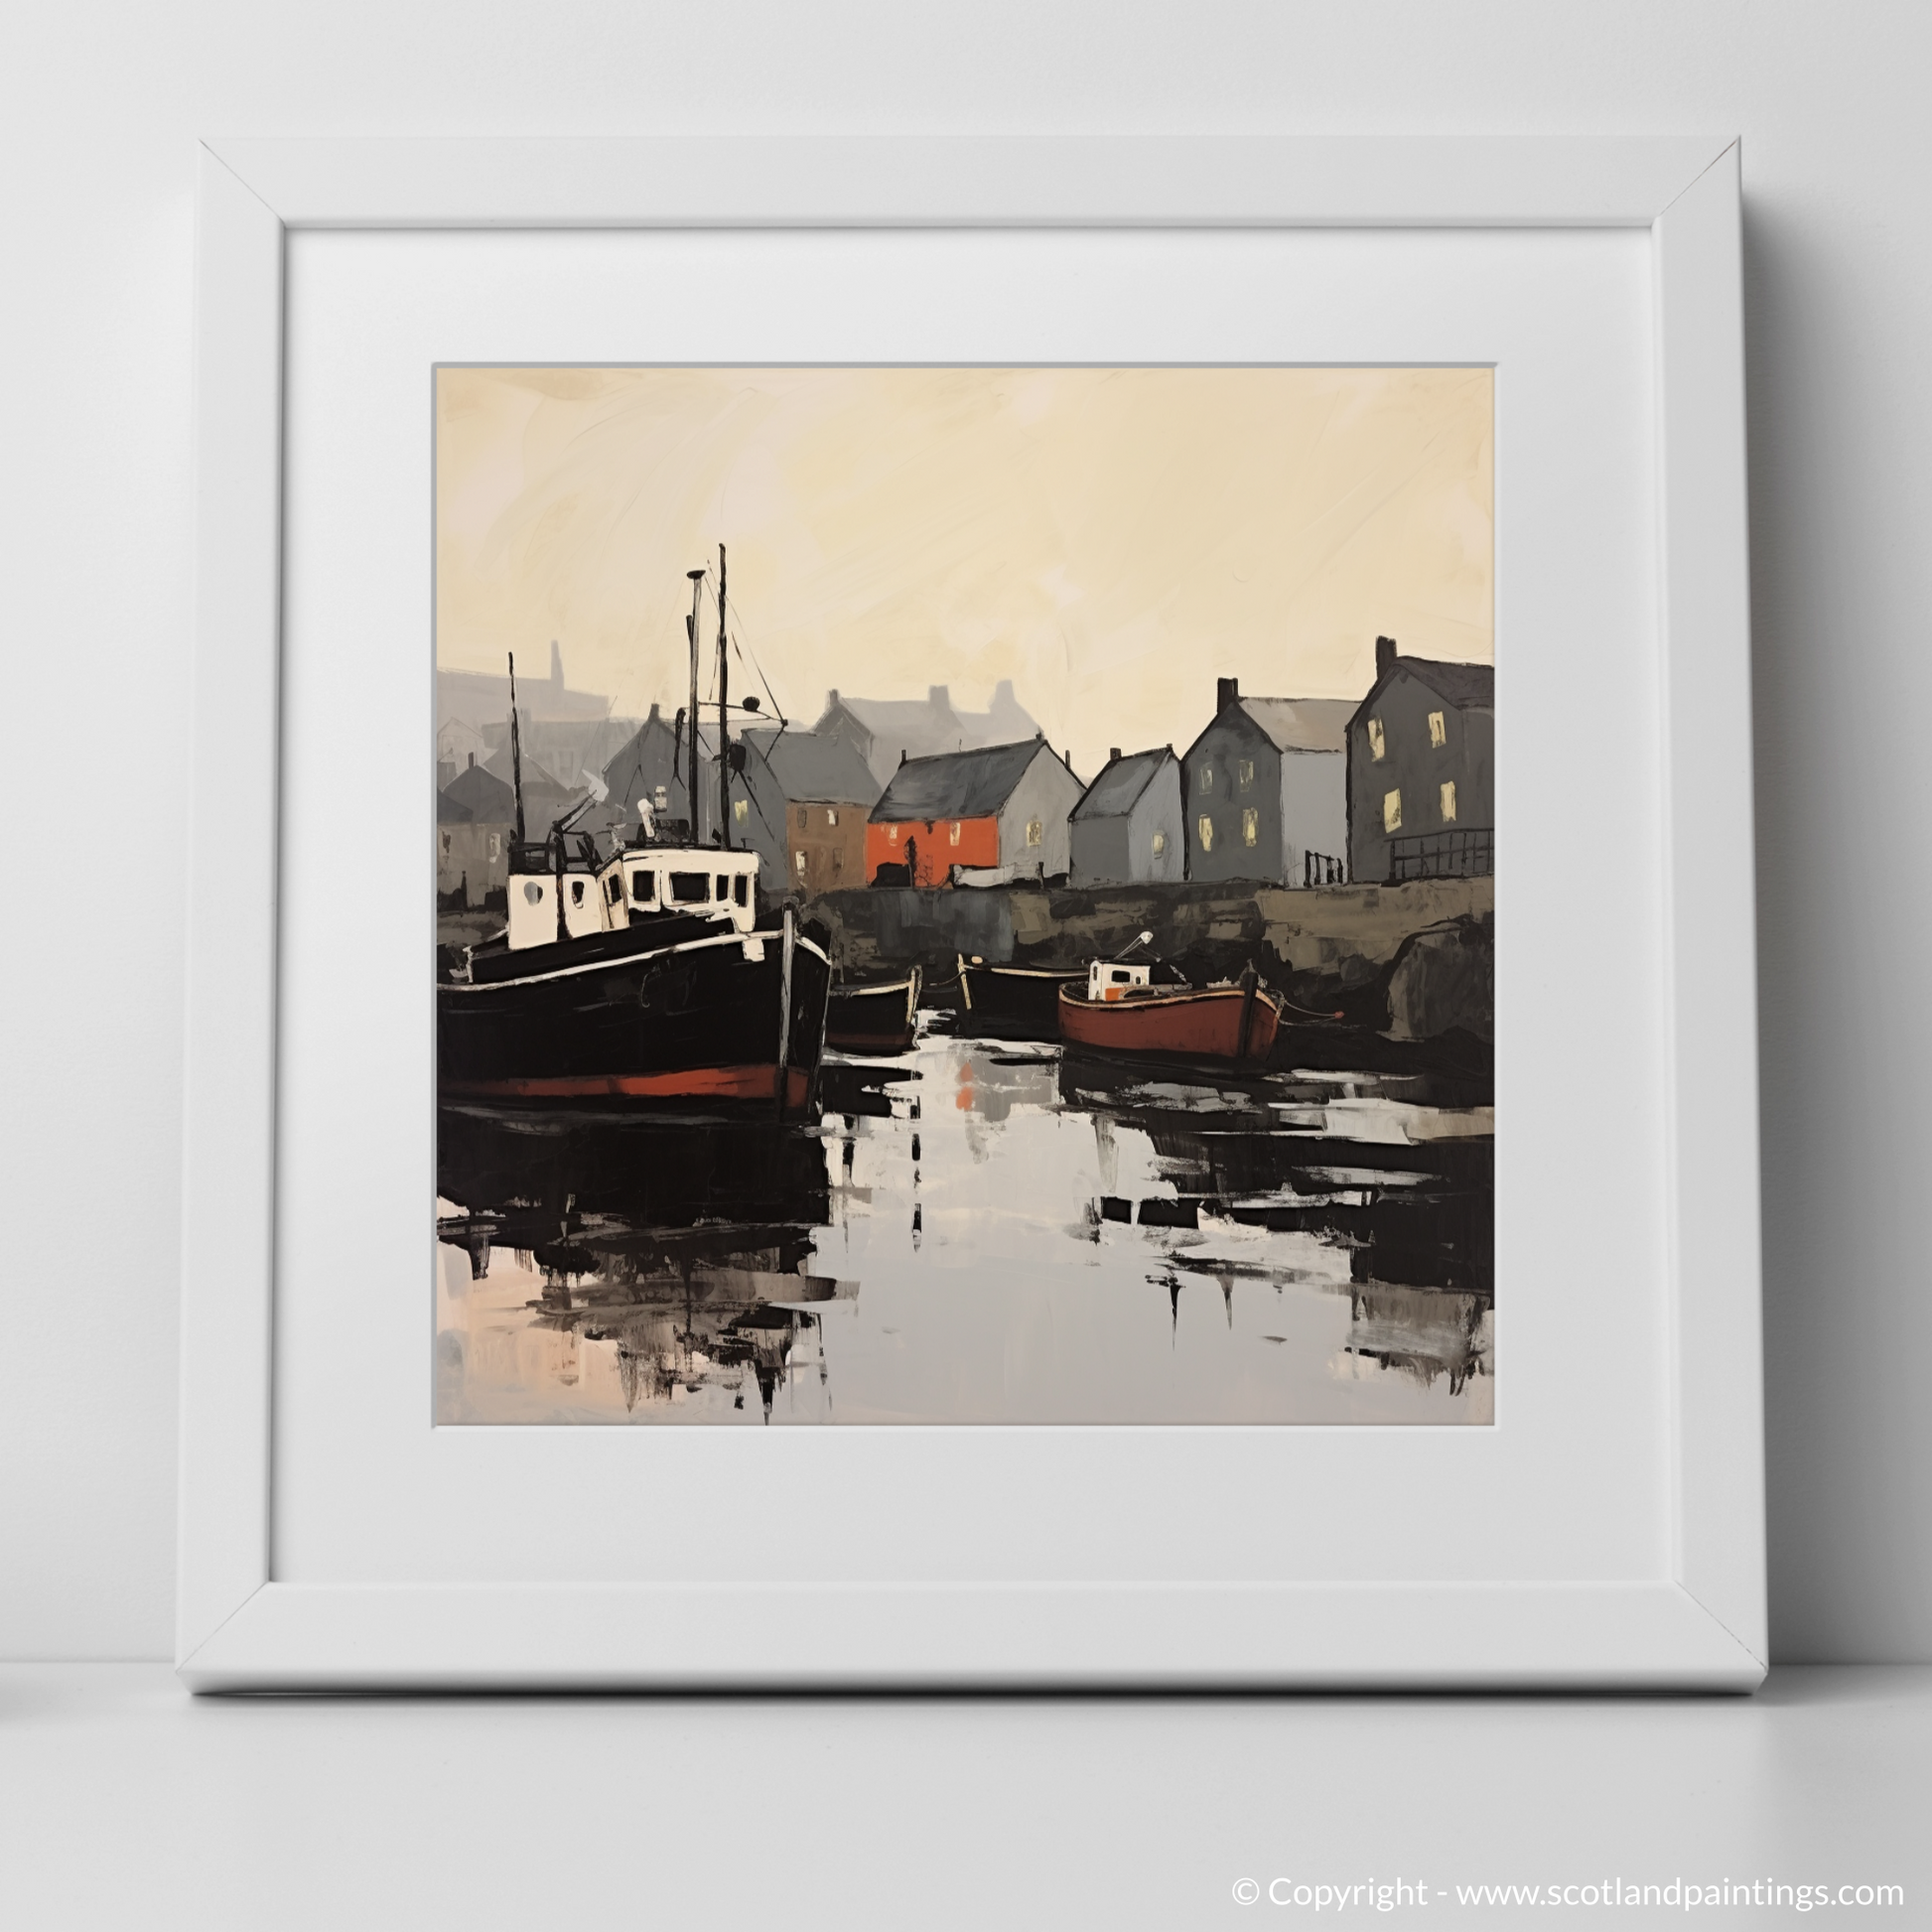 Art Print of Stornoway Harbour with a white frame